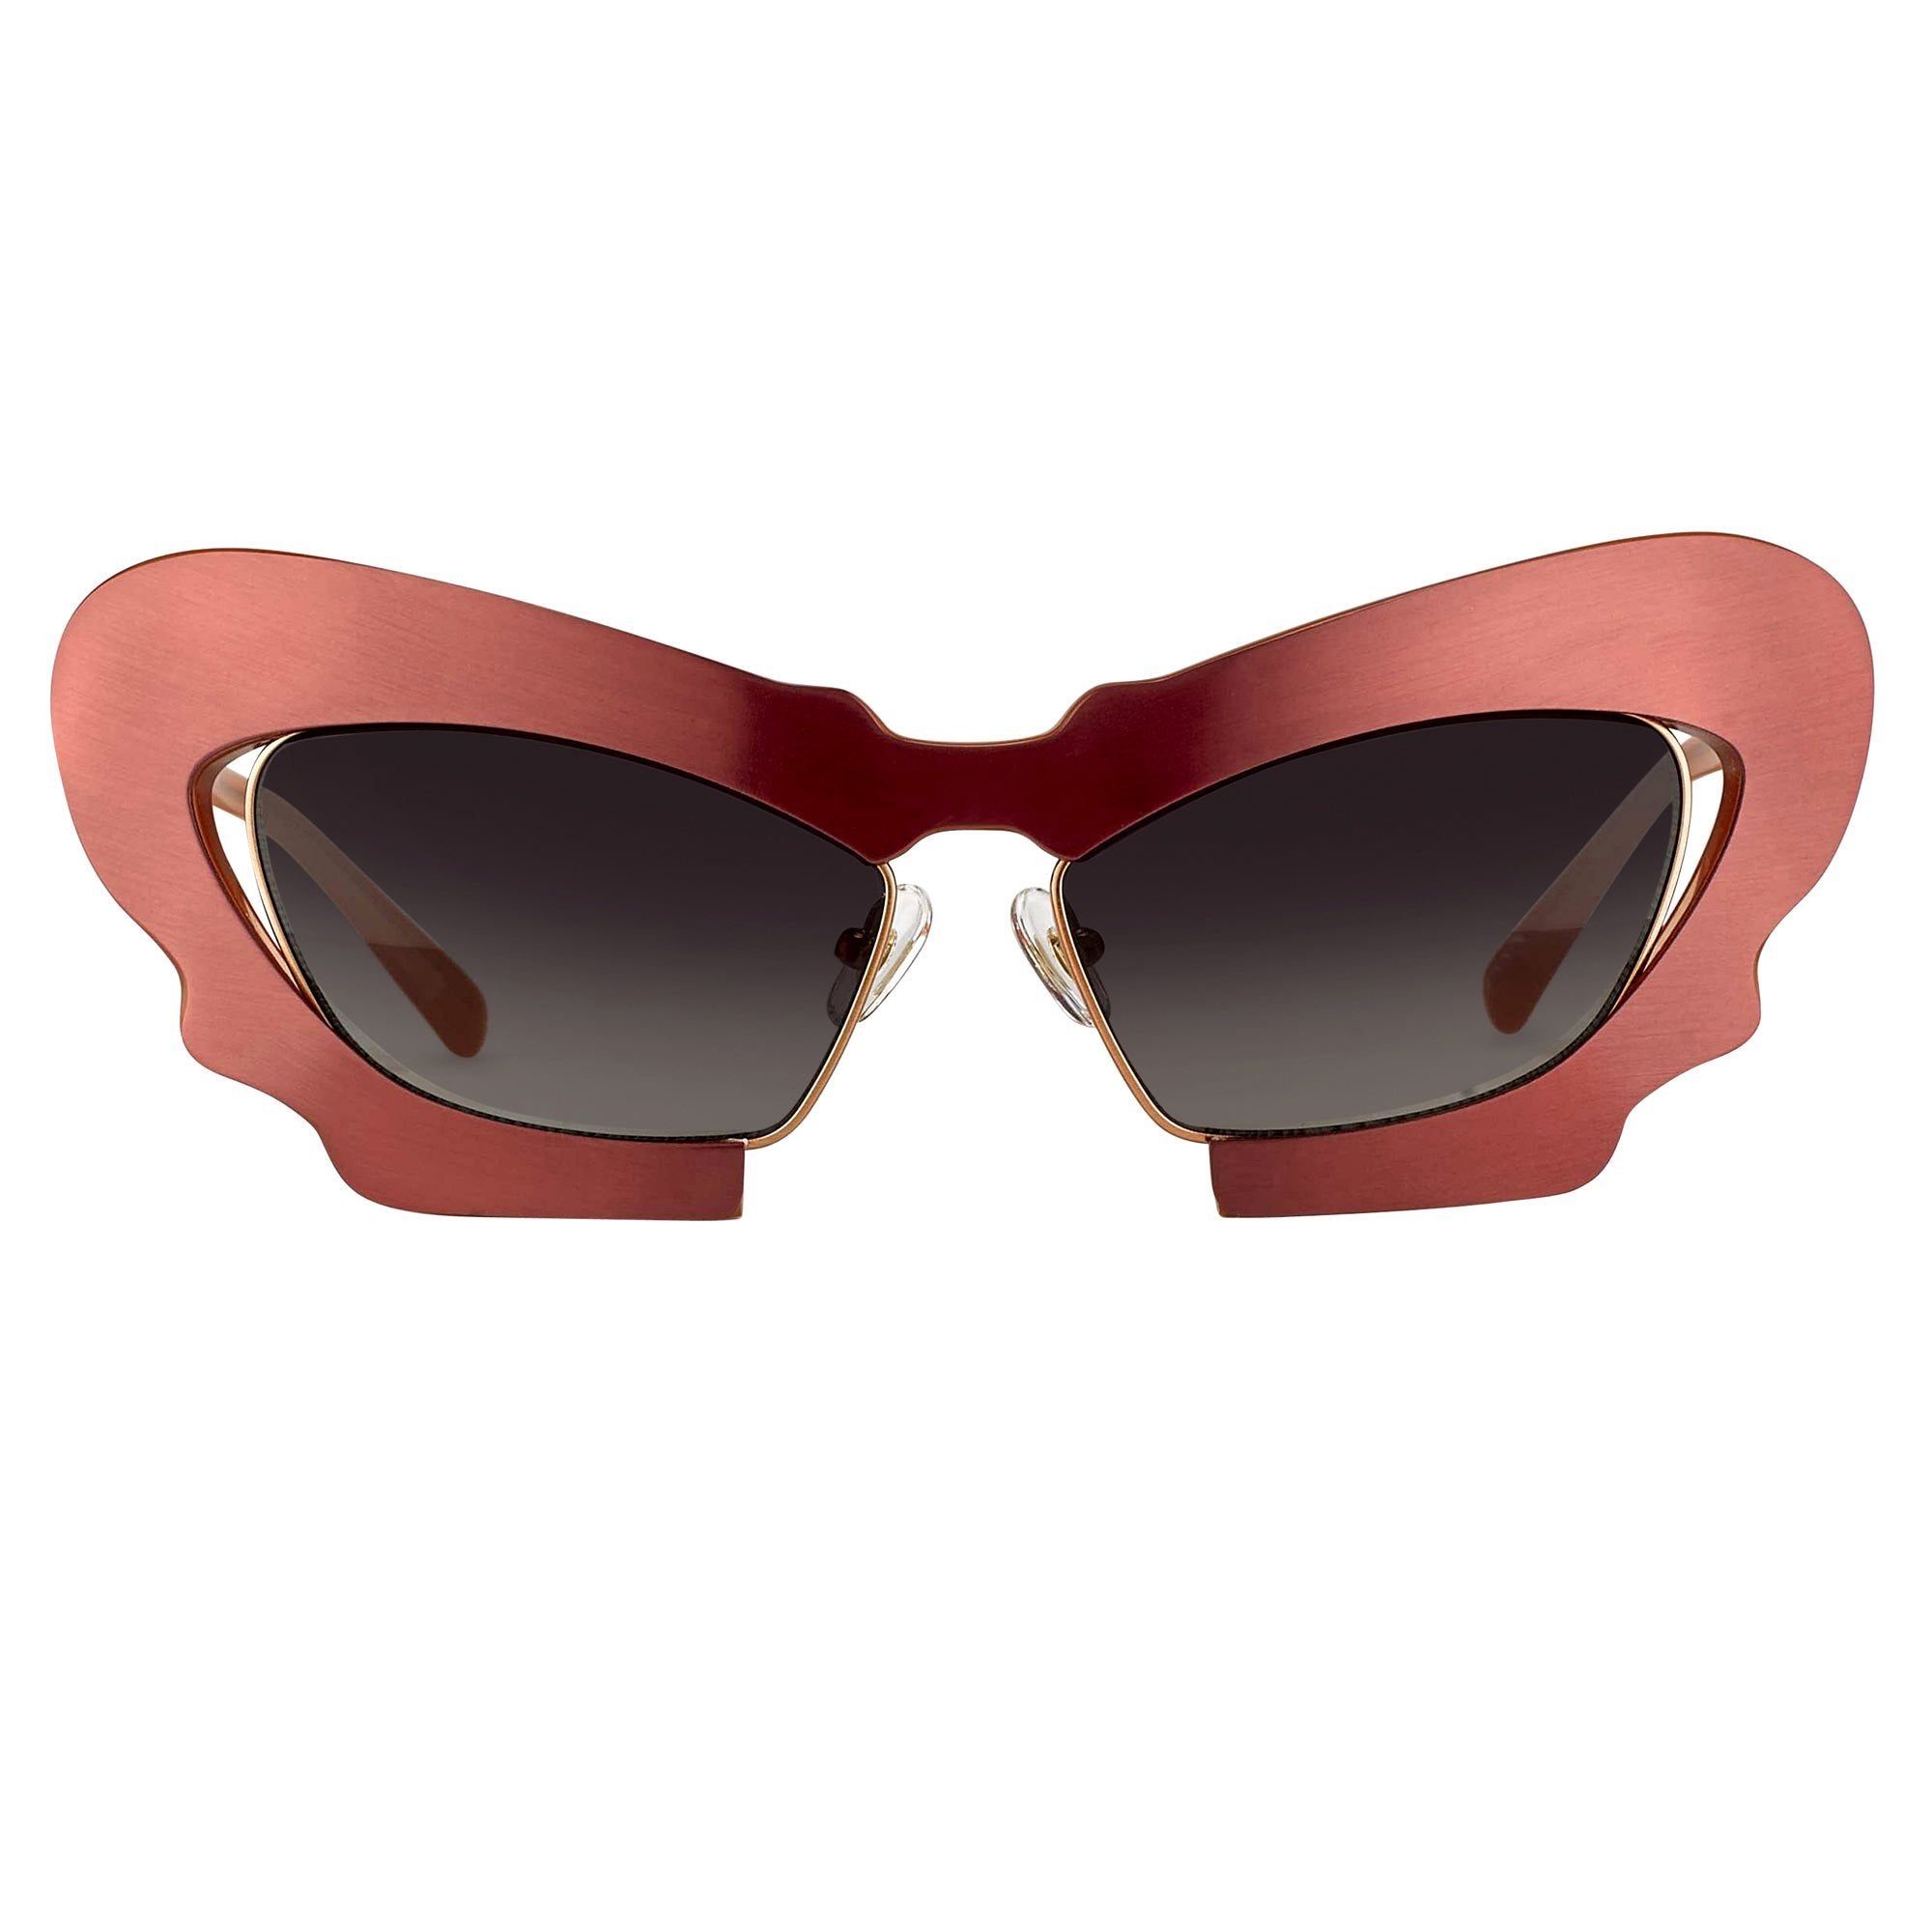 Prabal Gurung Sunglasses Female Cat Eye Brushed Red Category 3 Grey Gradient Lenses PG1C10SUN - Watches & Crystals